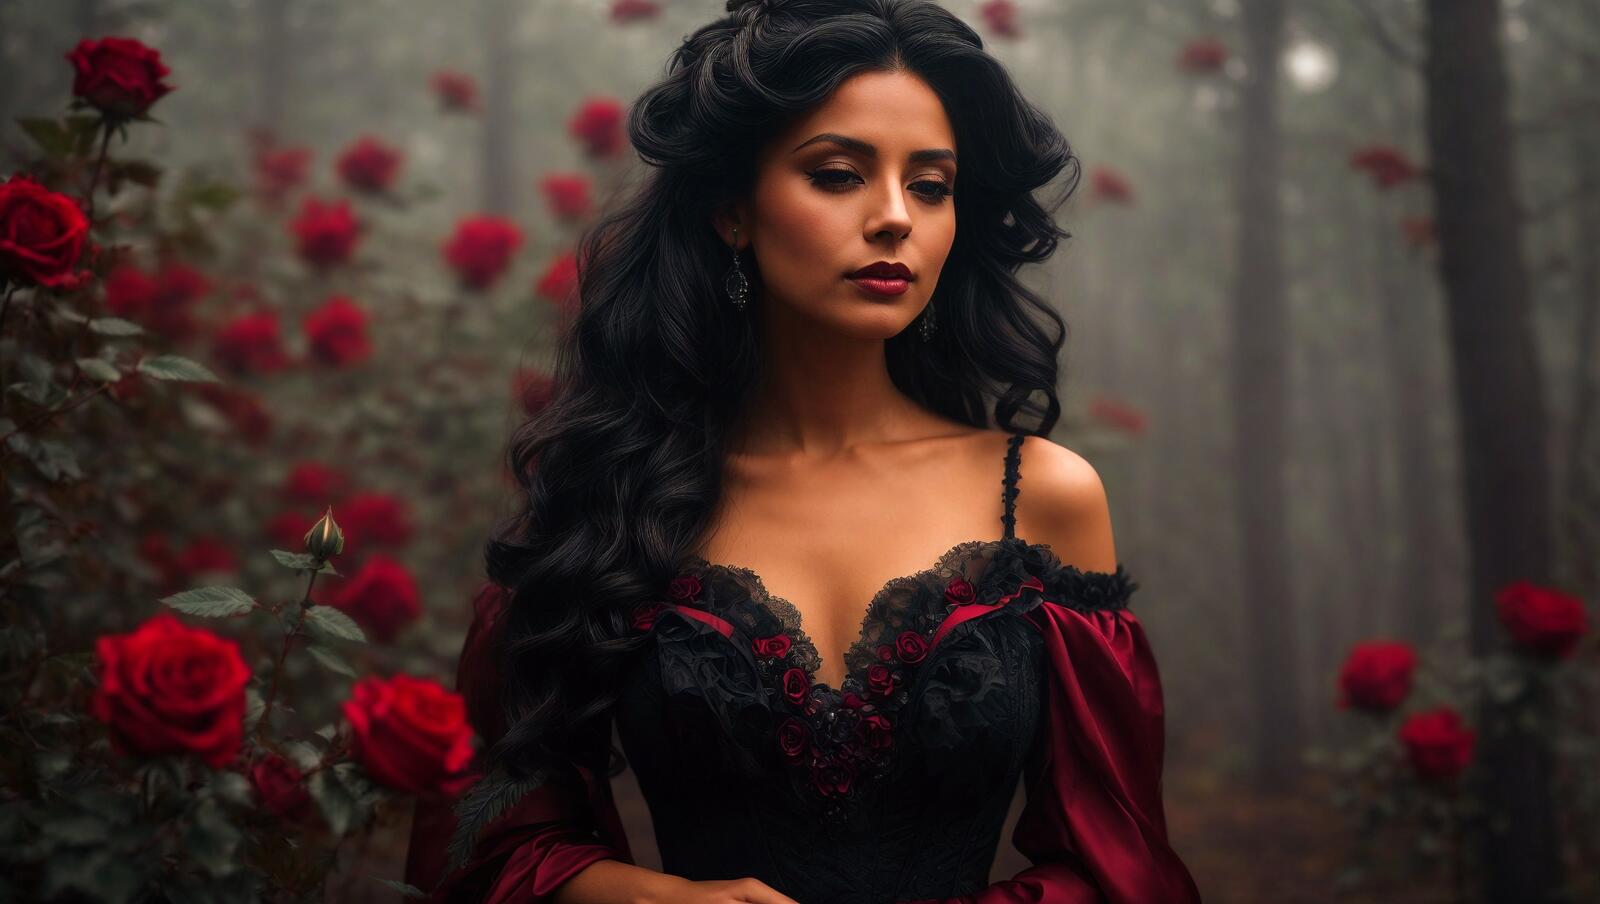 Free photo A woman with long hair in a black dress is surrounded by red roses